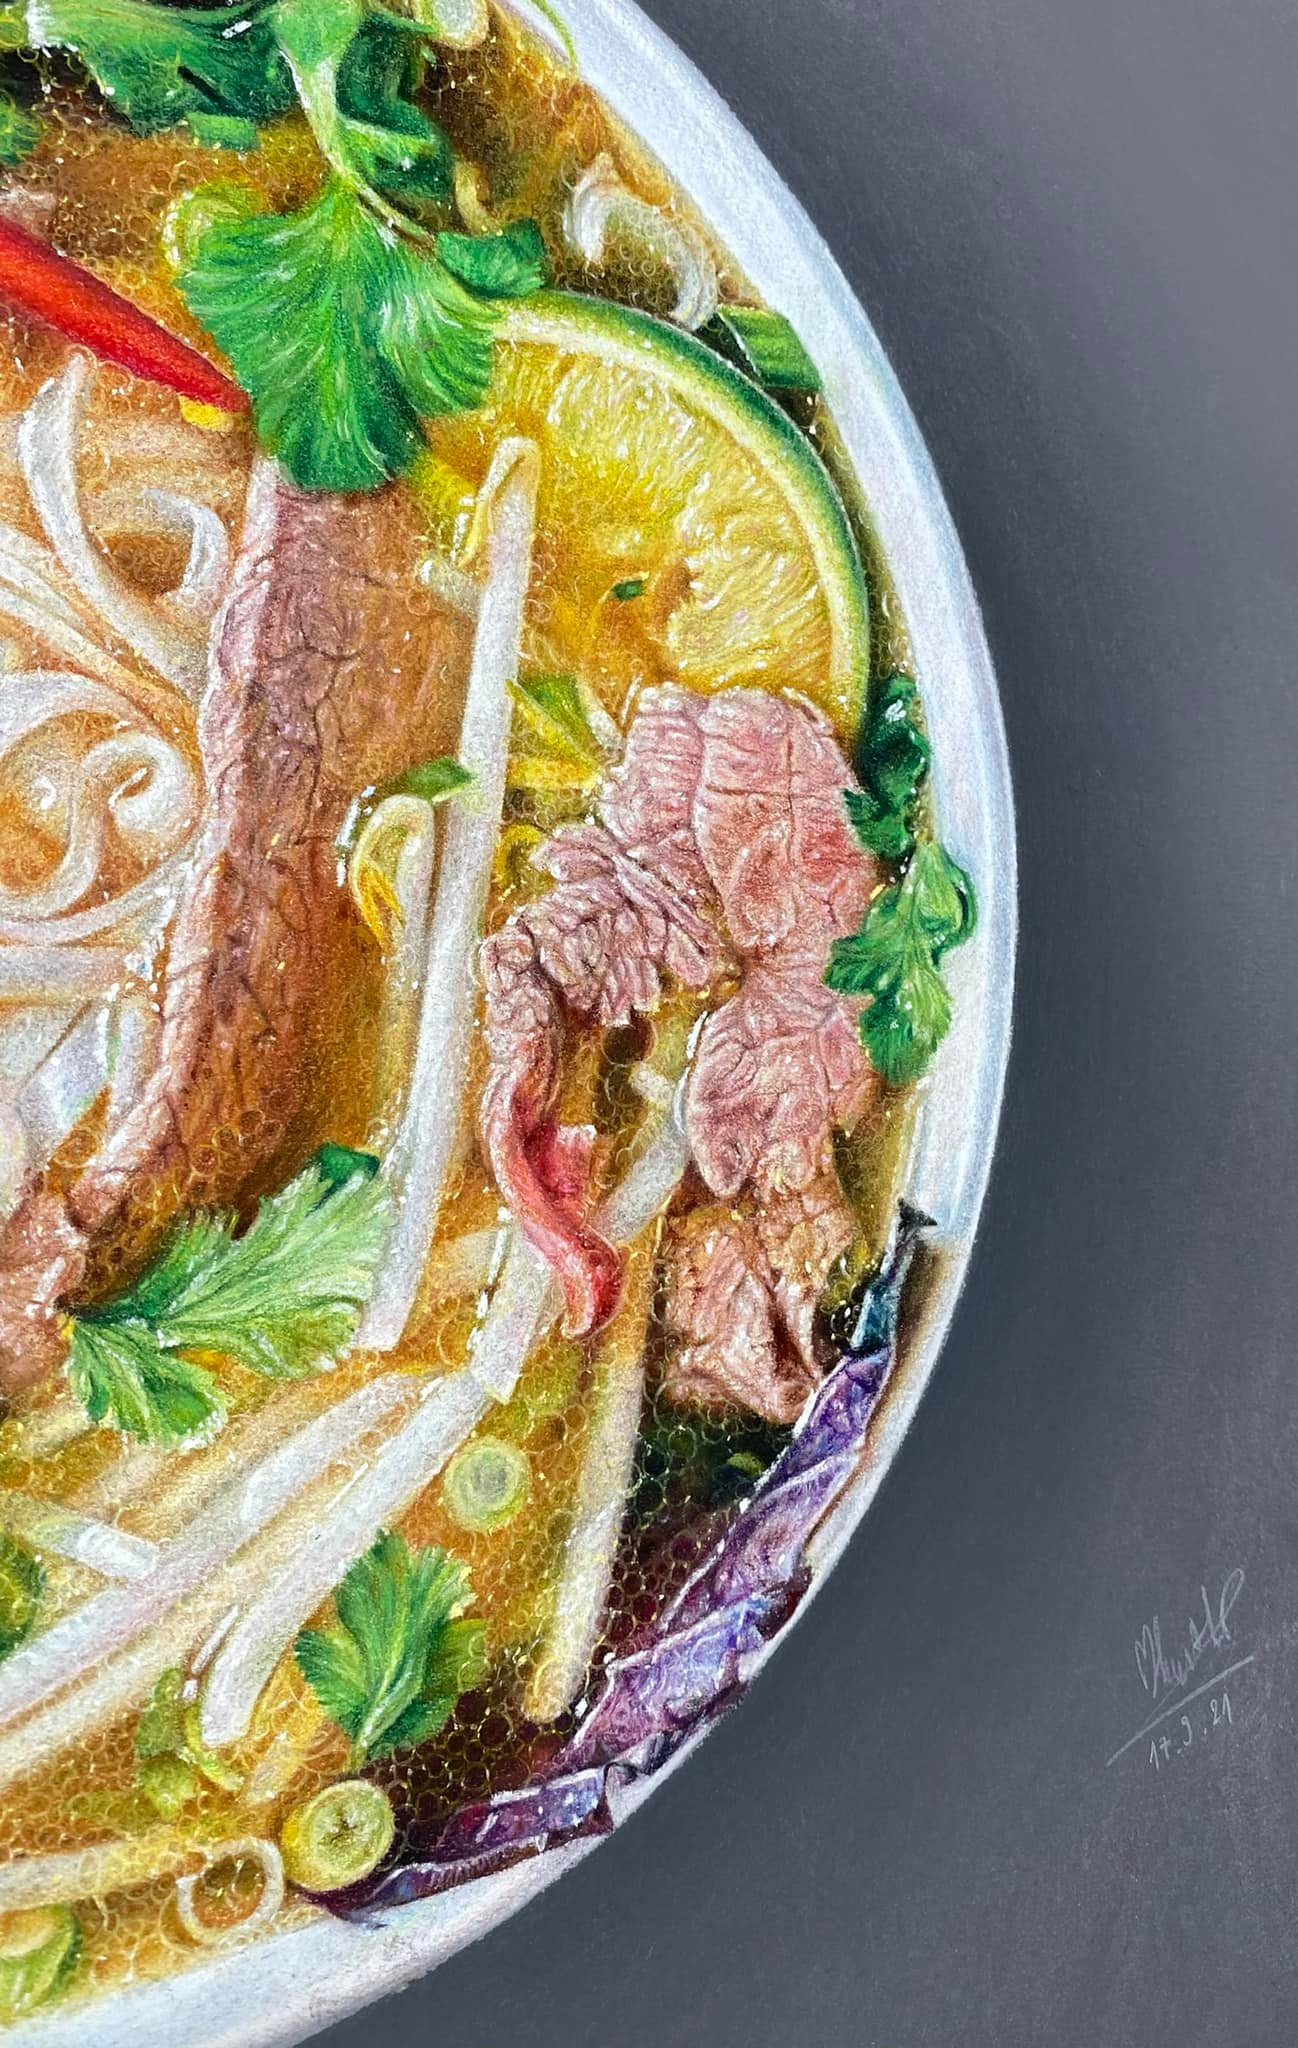 This painting of a bowl of 'pho' is drawn with chalk by Le Dai Phat. Photo: Le Dai Phat / Handout via Tuoi Tre